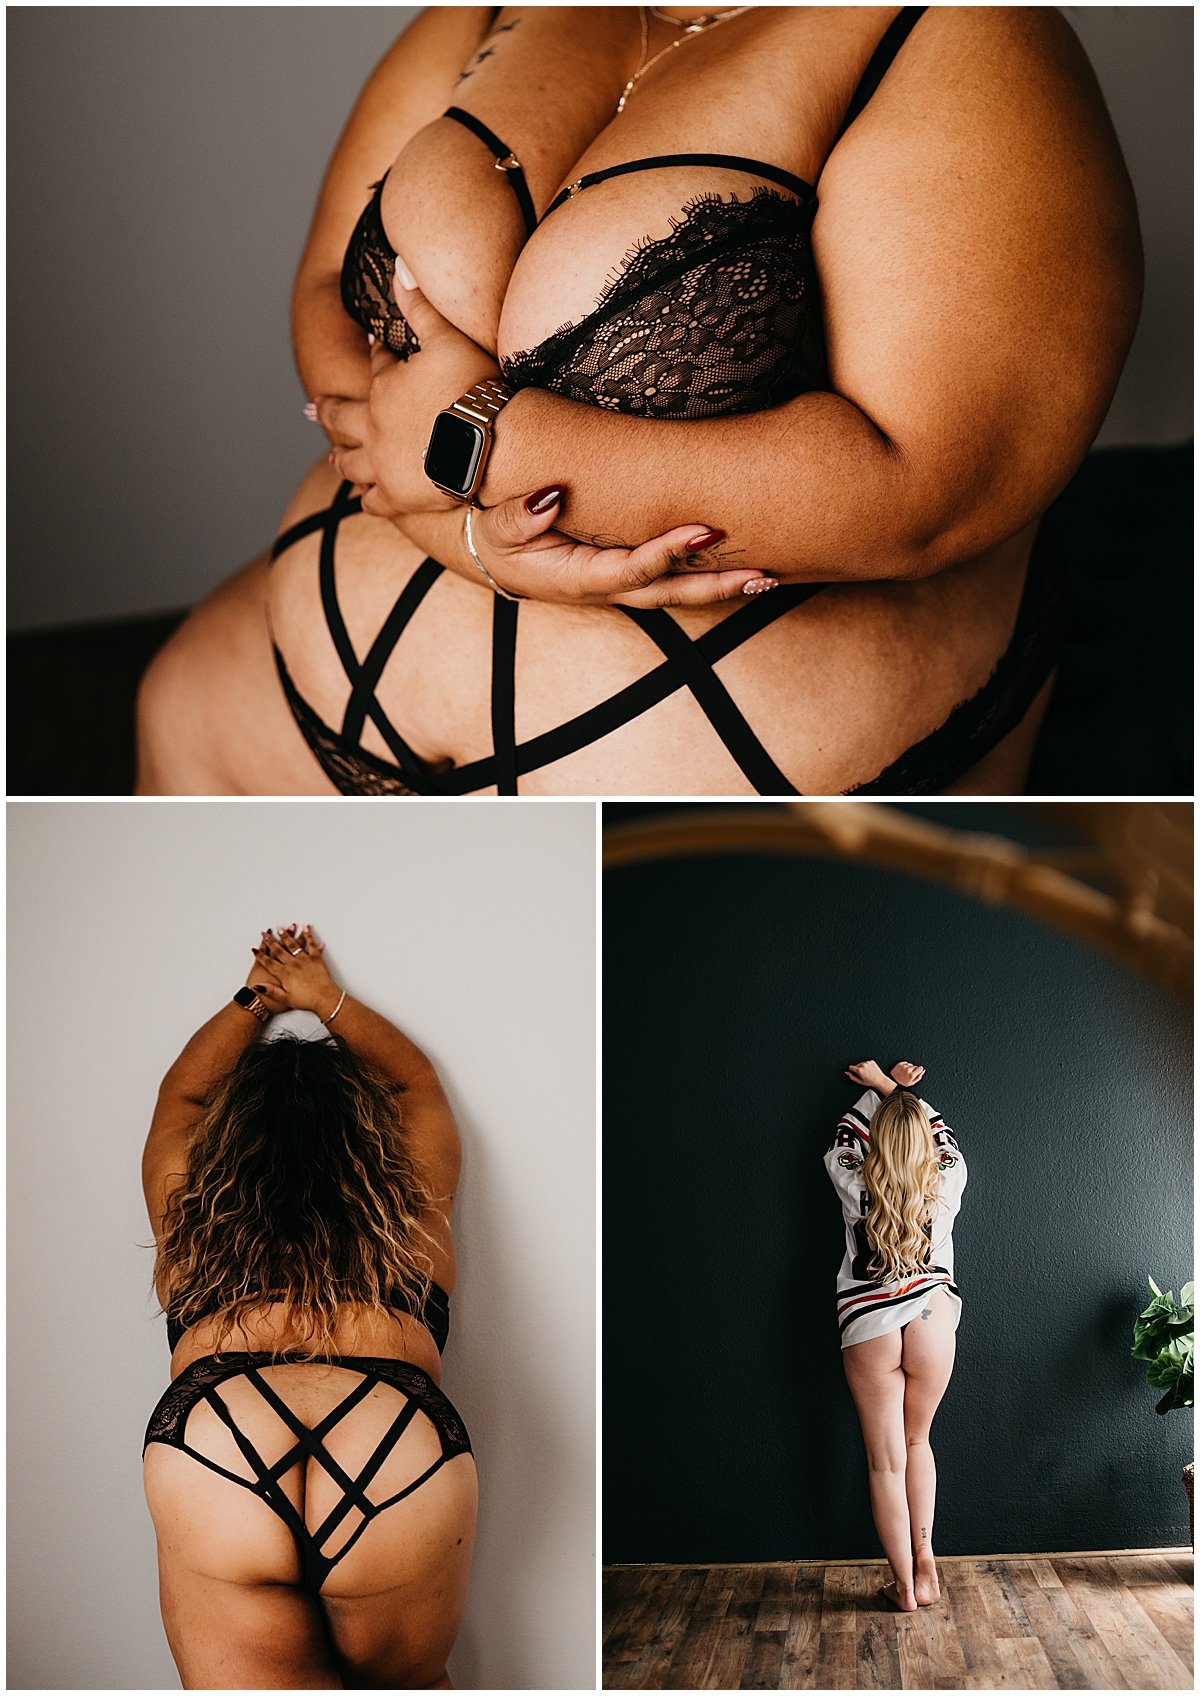  Boudoir Day Timeline shoot with photographer and woman wearing black strapped lingerie  